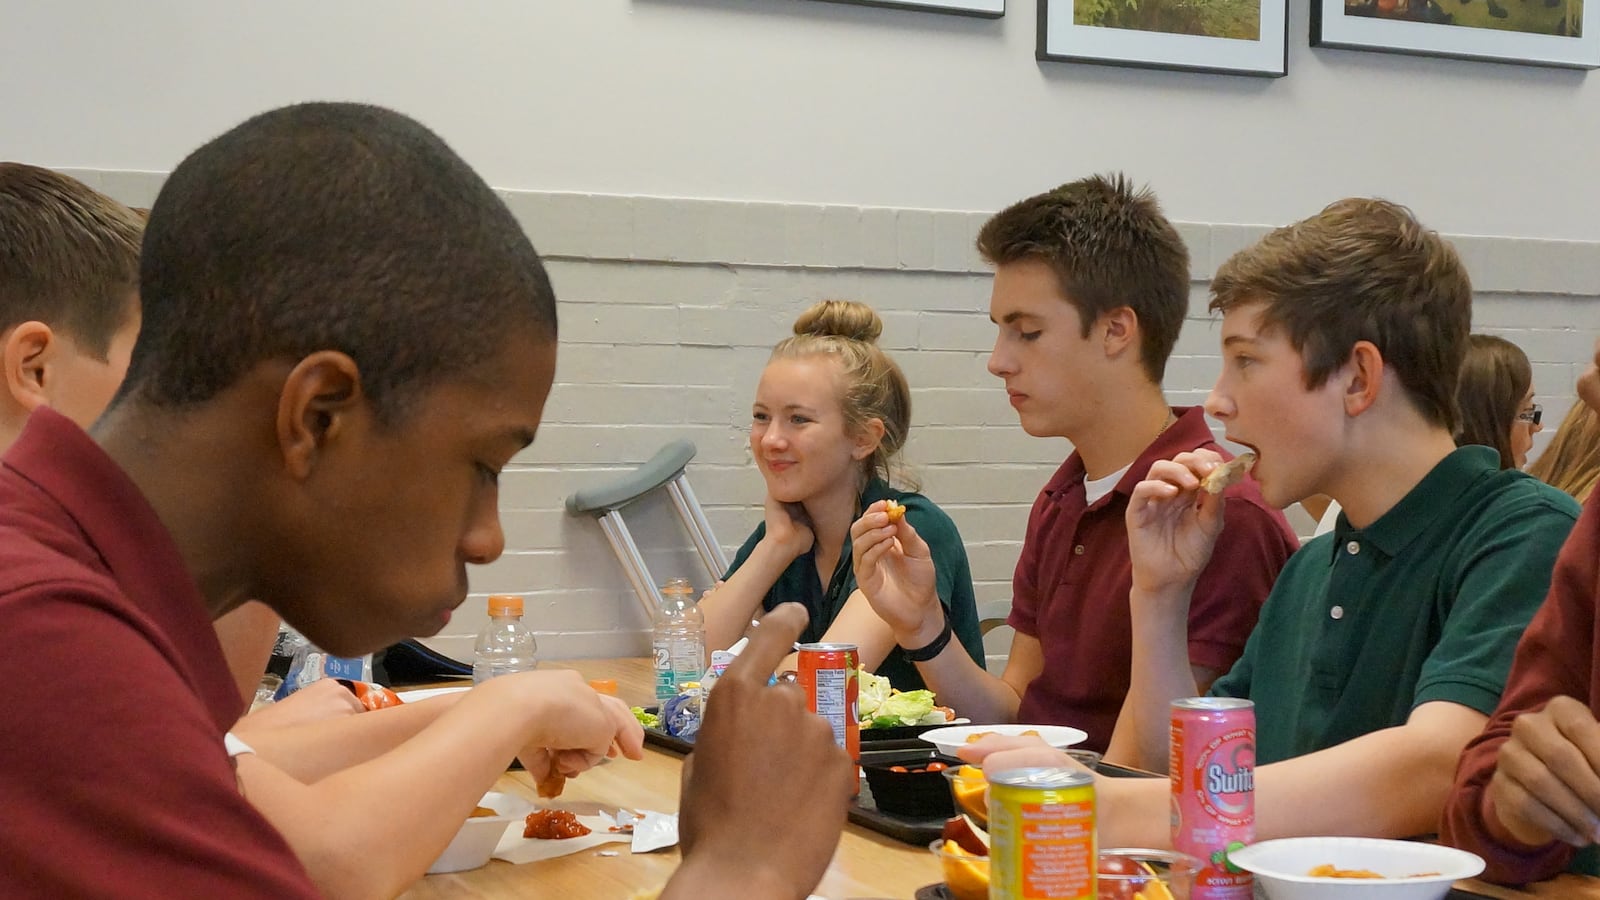 Students eat lunch at the Oaks Academy Middle School, a private Christian school in Indiana that is integrated by design and accepts taxpayer funded vouchers.